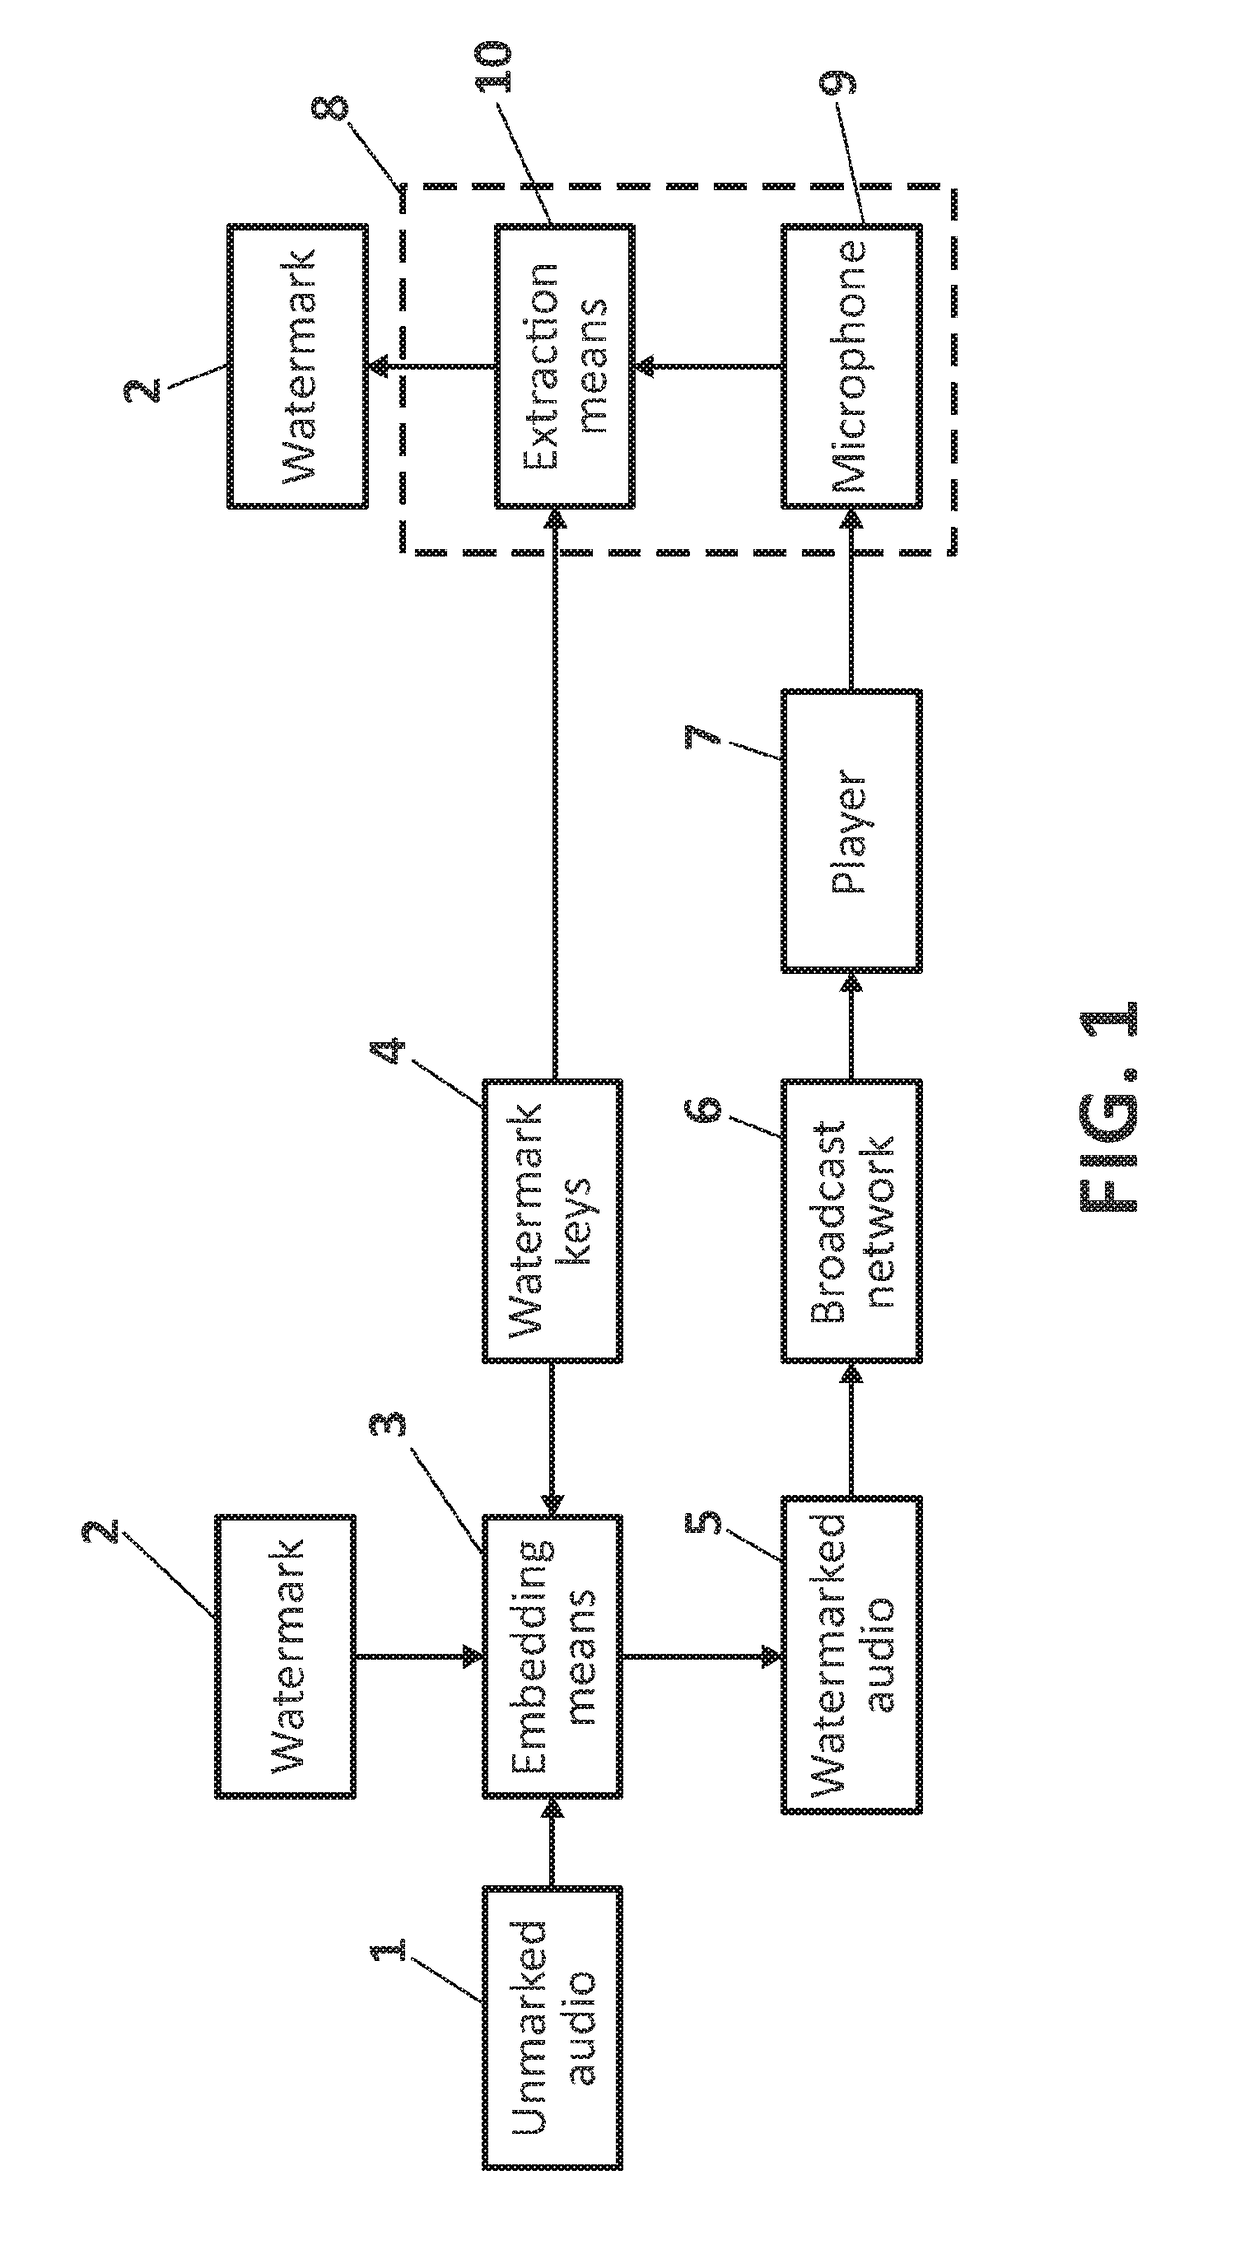 Method and apparatus for embedding and extracting watermark data in an audio signal